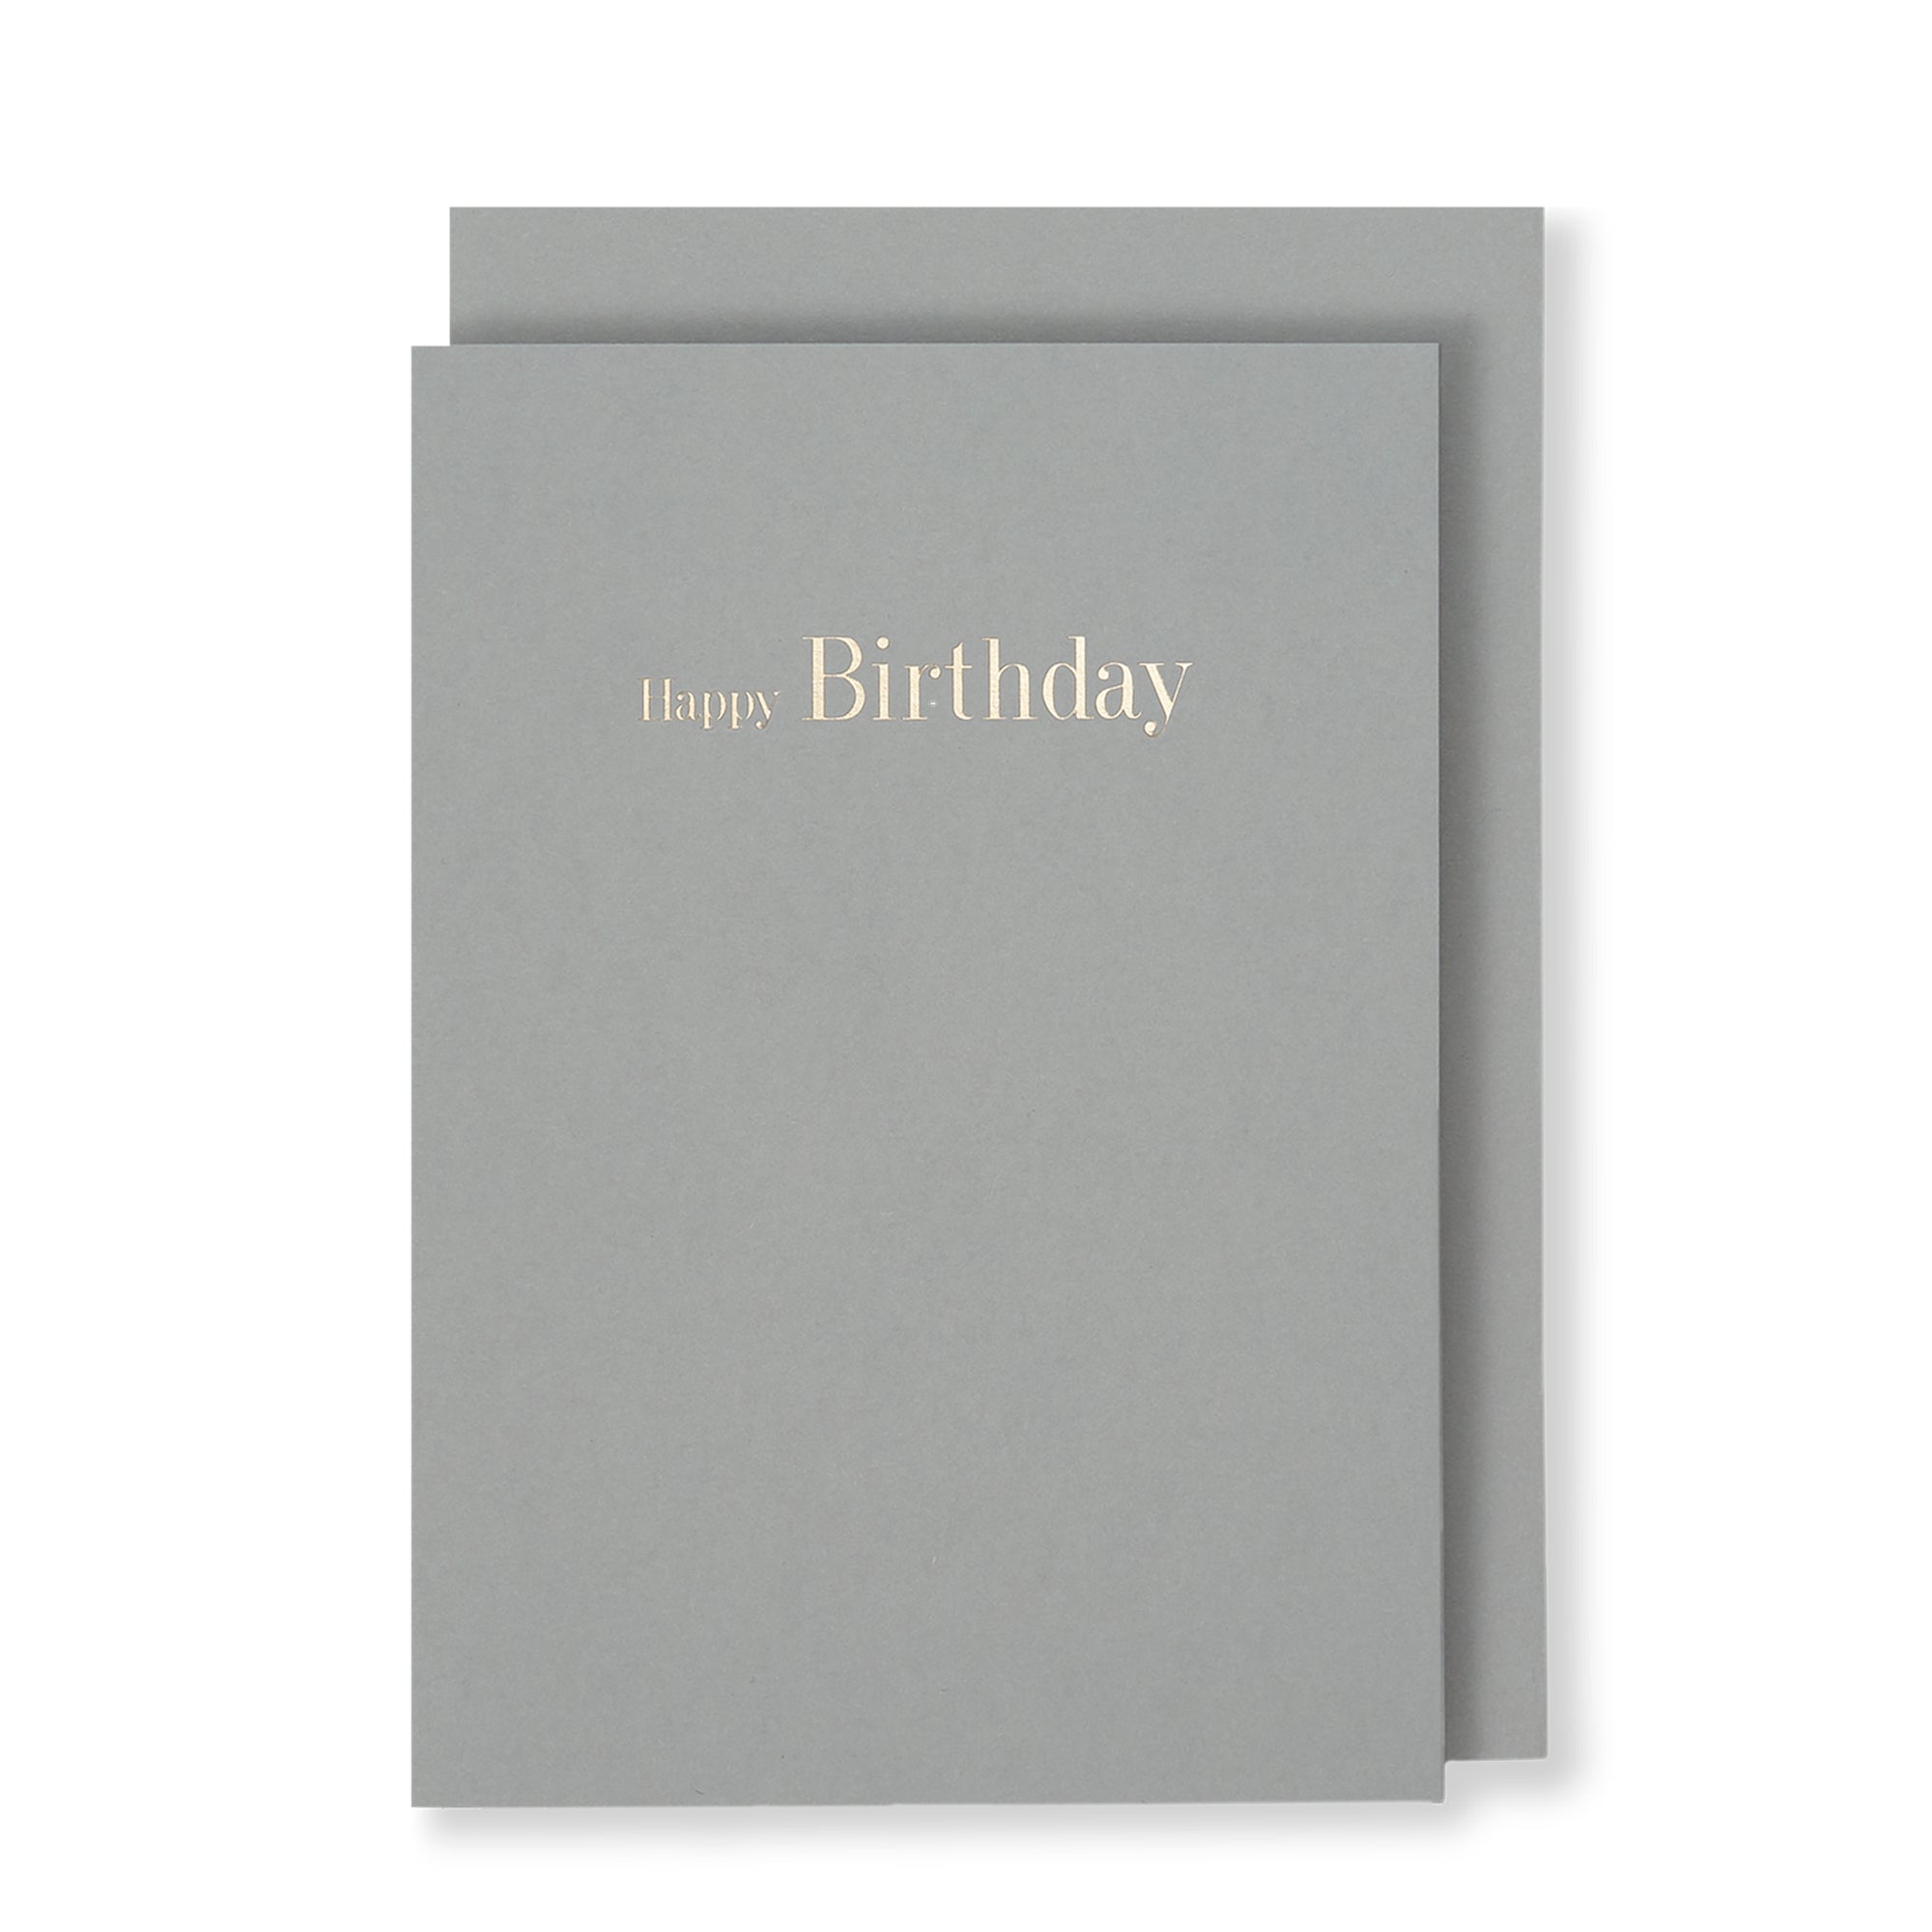 Happy Birthday Greeting Card in Grey, Front